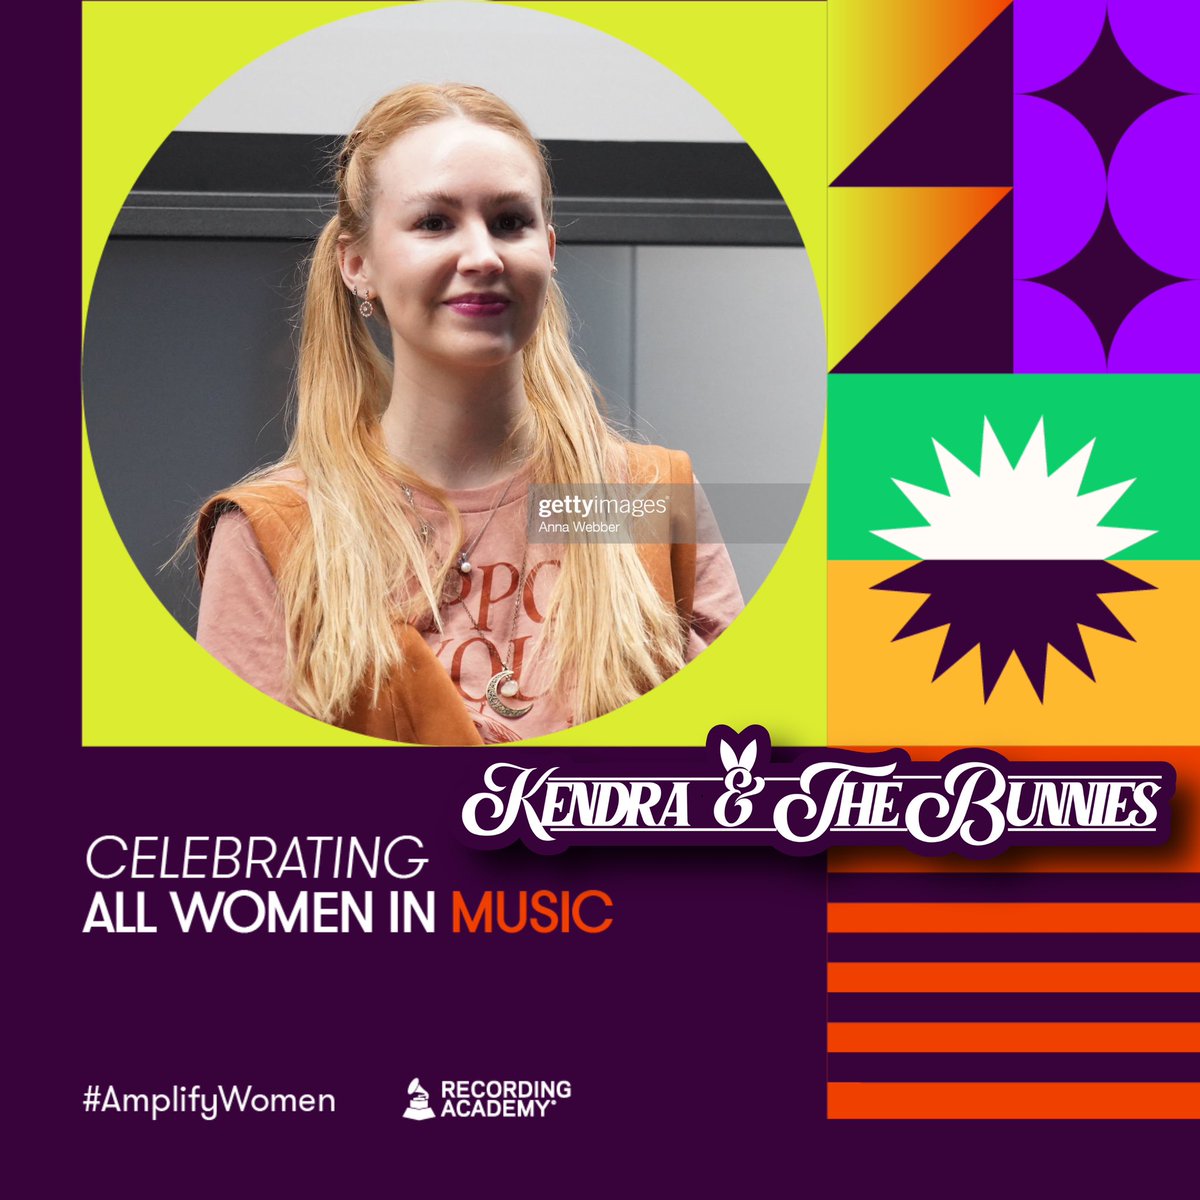 This #WomensHistoryMonth, I join the @RecordingAcad in uplifting and celebrating my fellow women in music. Our experiences and perspectives matter, and they inspire me to continue fighting for positive change. I’m proud to #AmplifyWomen and use my voice to shape an industry that